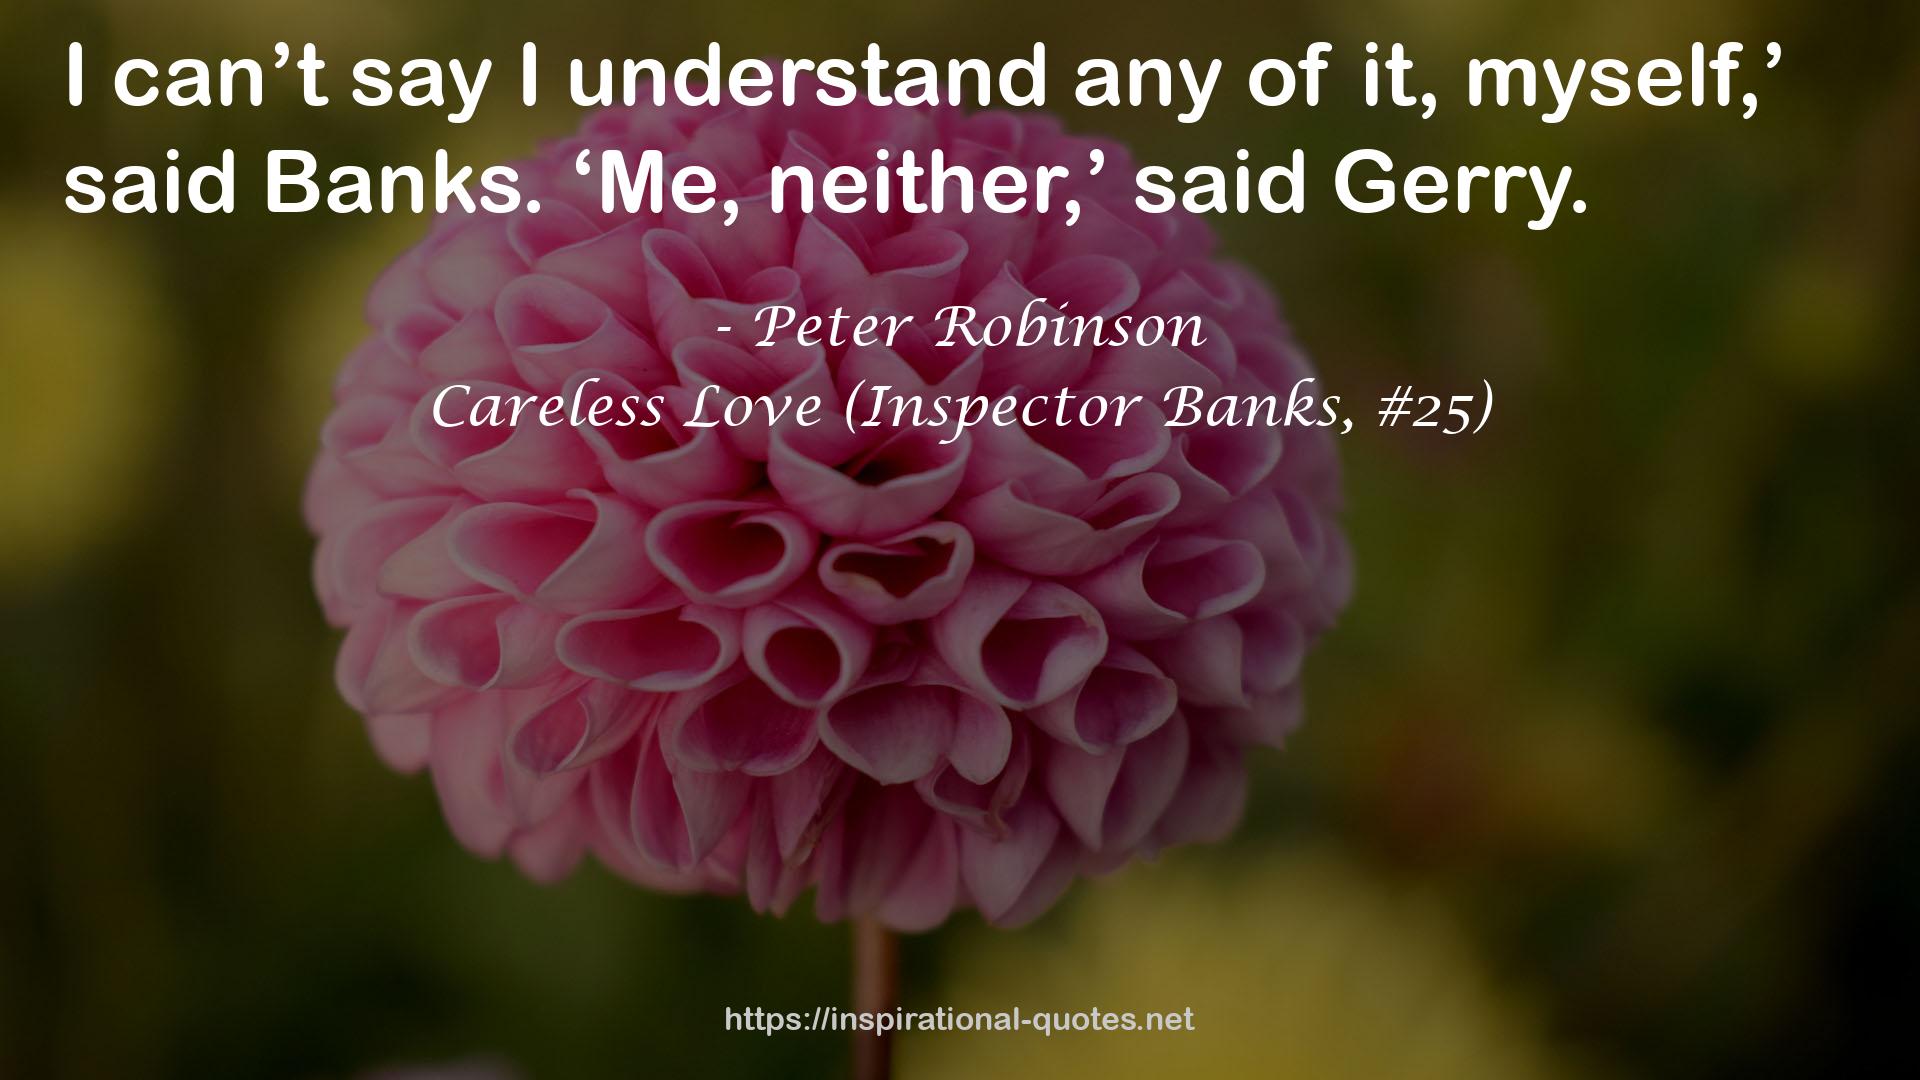 Careless Love (Inspector Banks, #25) QUOTES